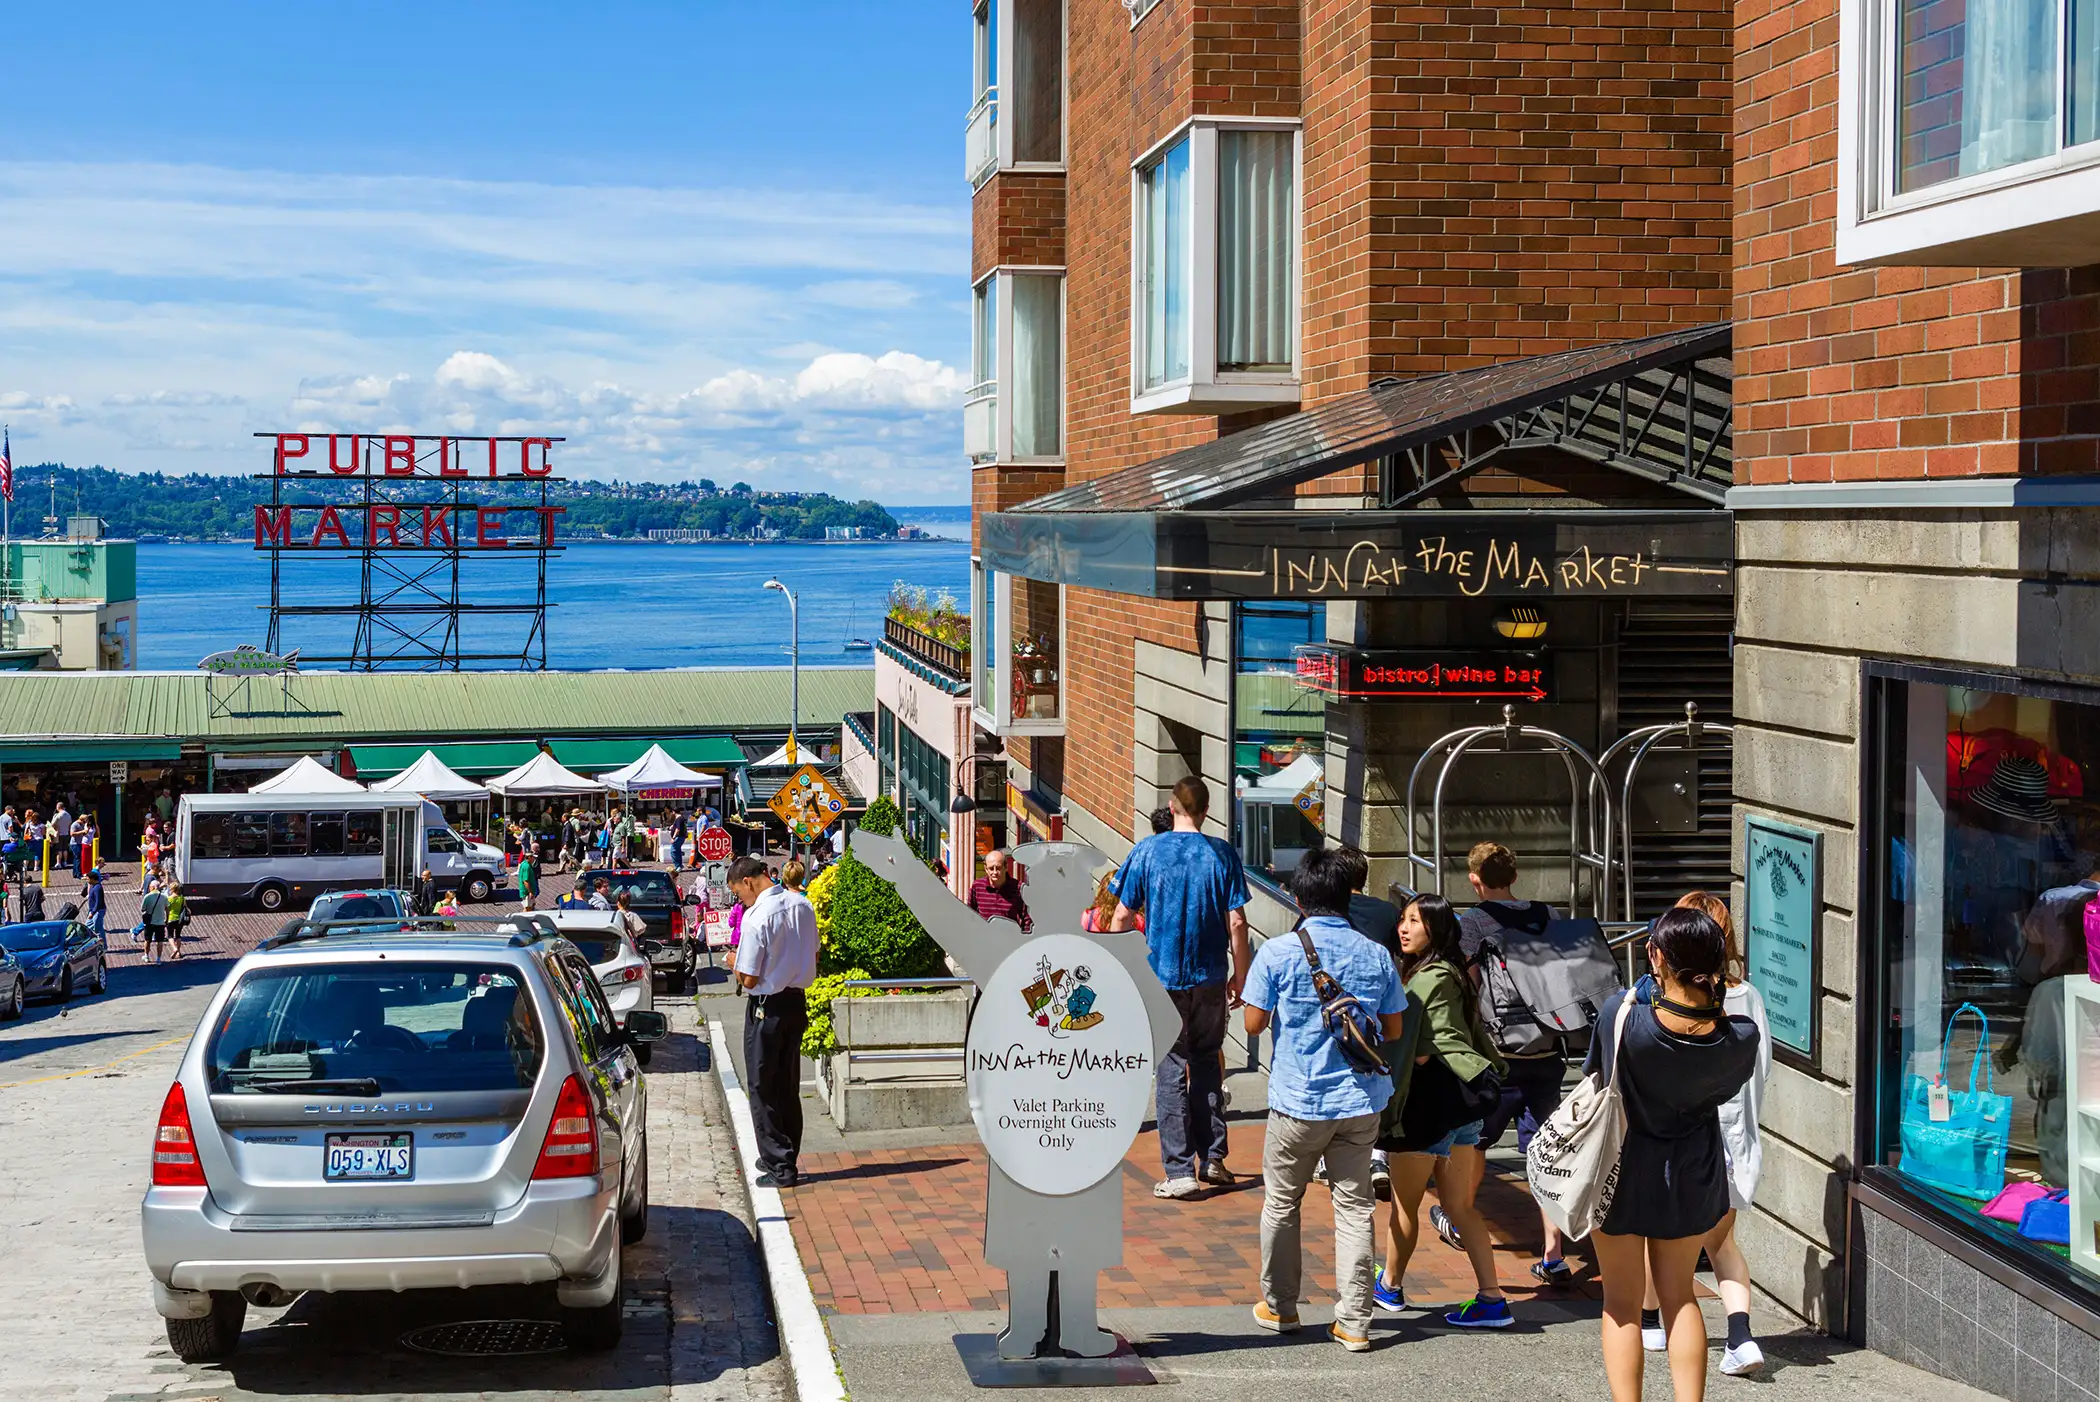 View down Pine Street of Pike Place Market with Inn at the Market in foreground, Seattle